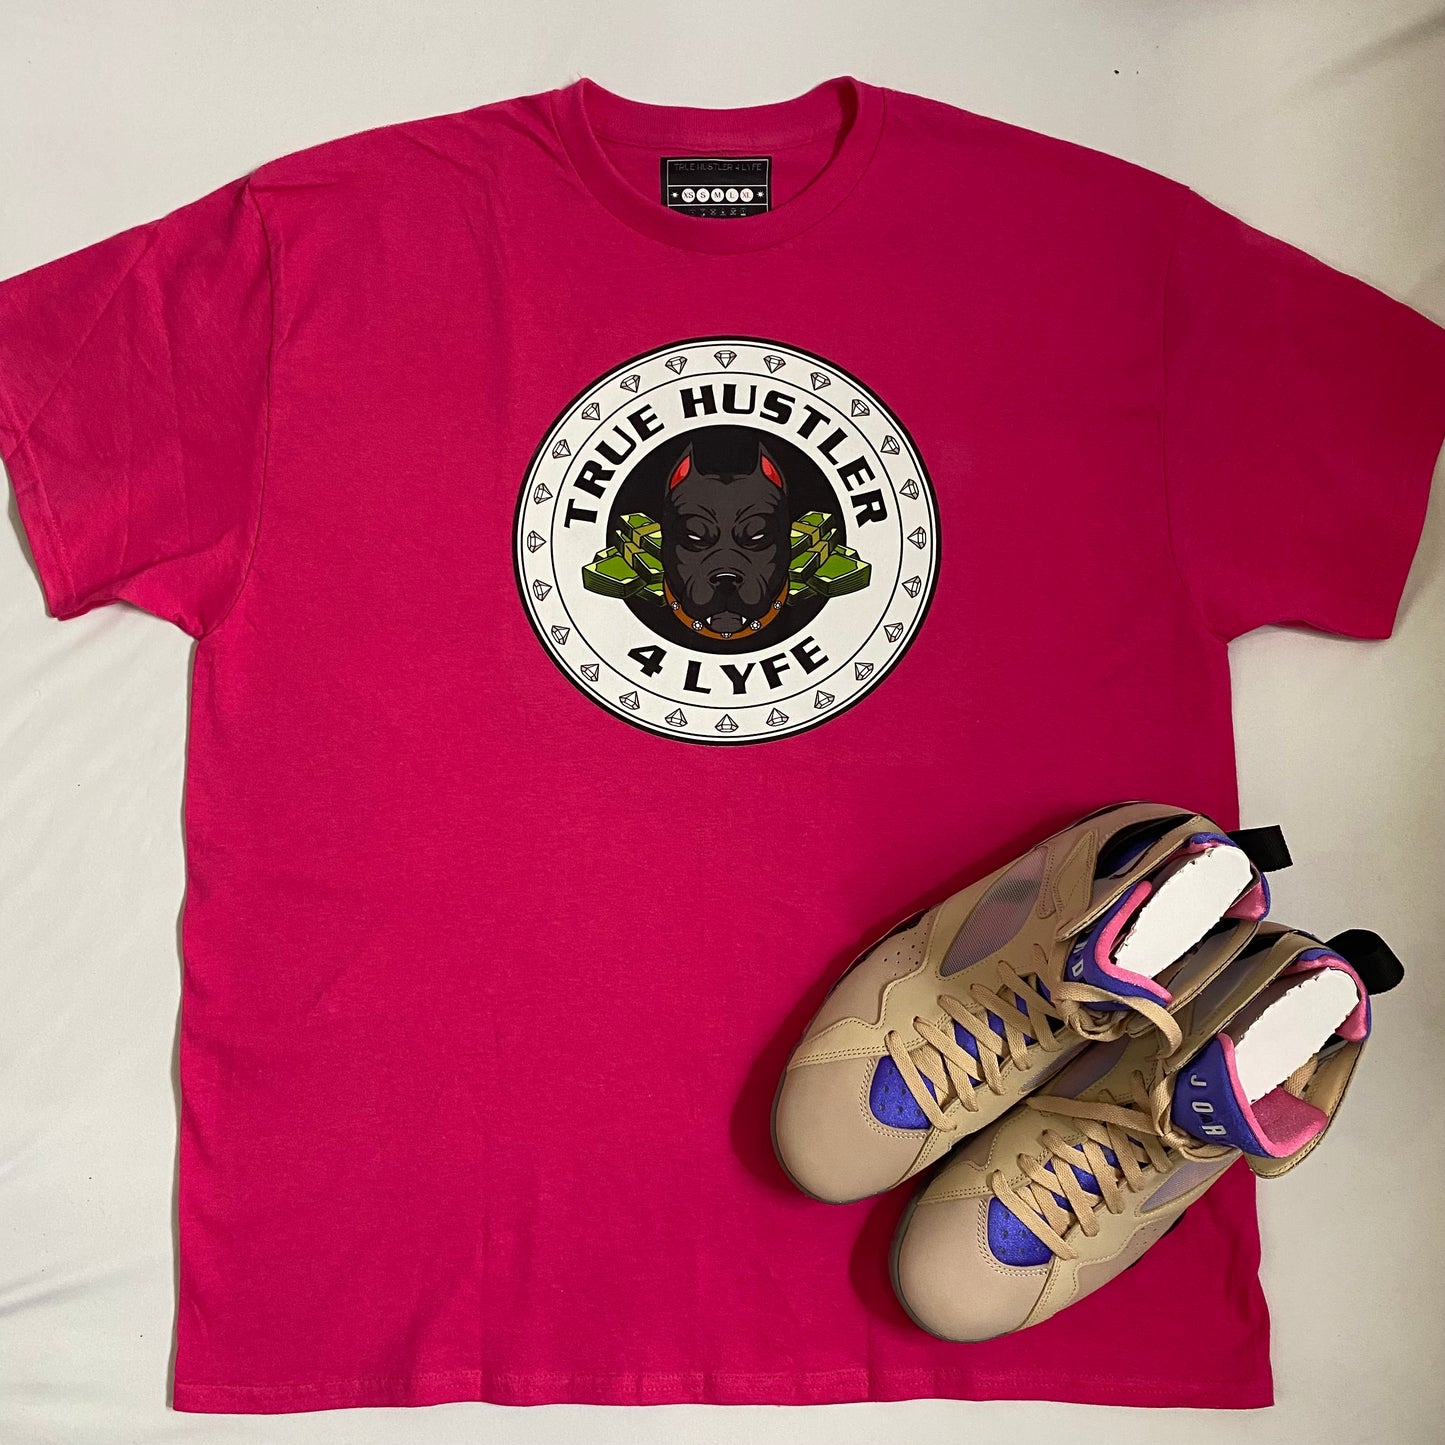 TH4L Grind Collection Unisex Graphic Tees - Hot Pink Heavy Duty Cotton T-Shirt and White Grind Logo Tee